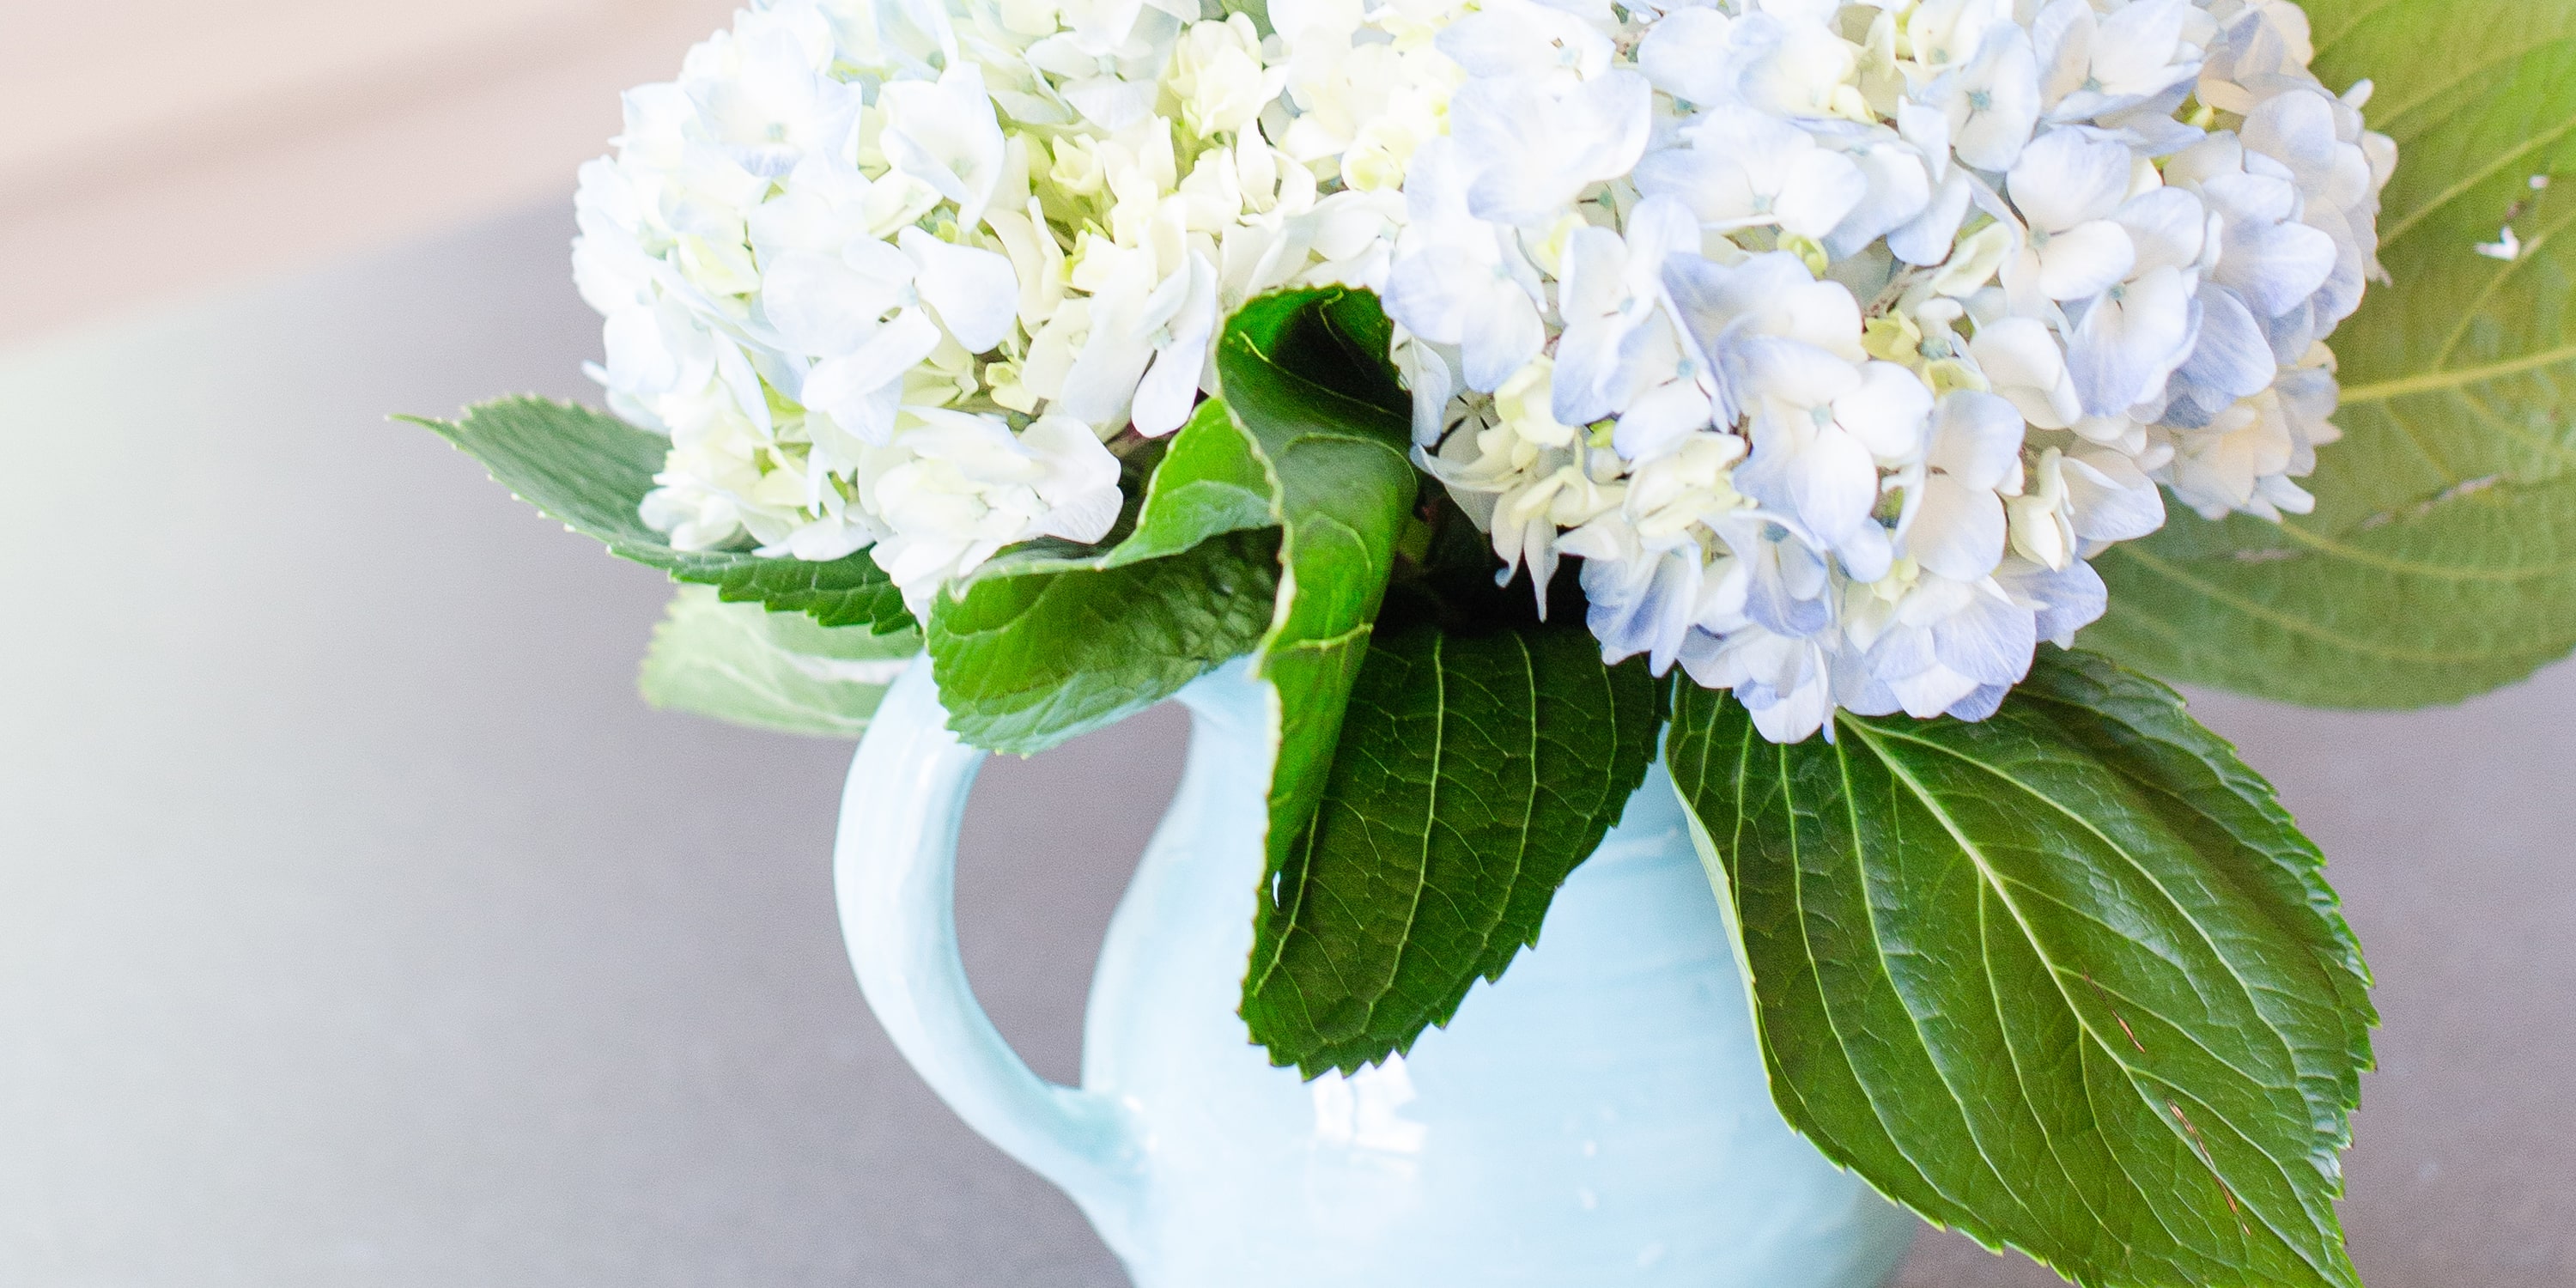 Our Partners Feature Image - Flowers in a jug